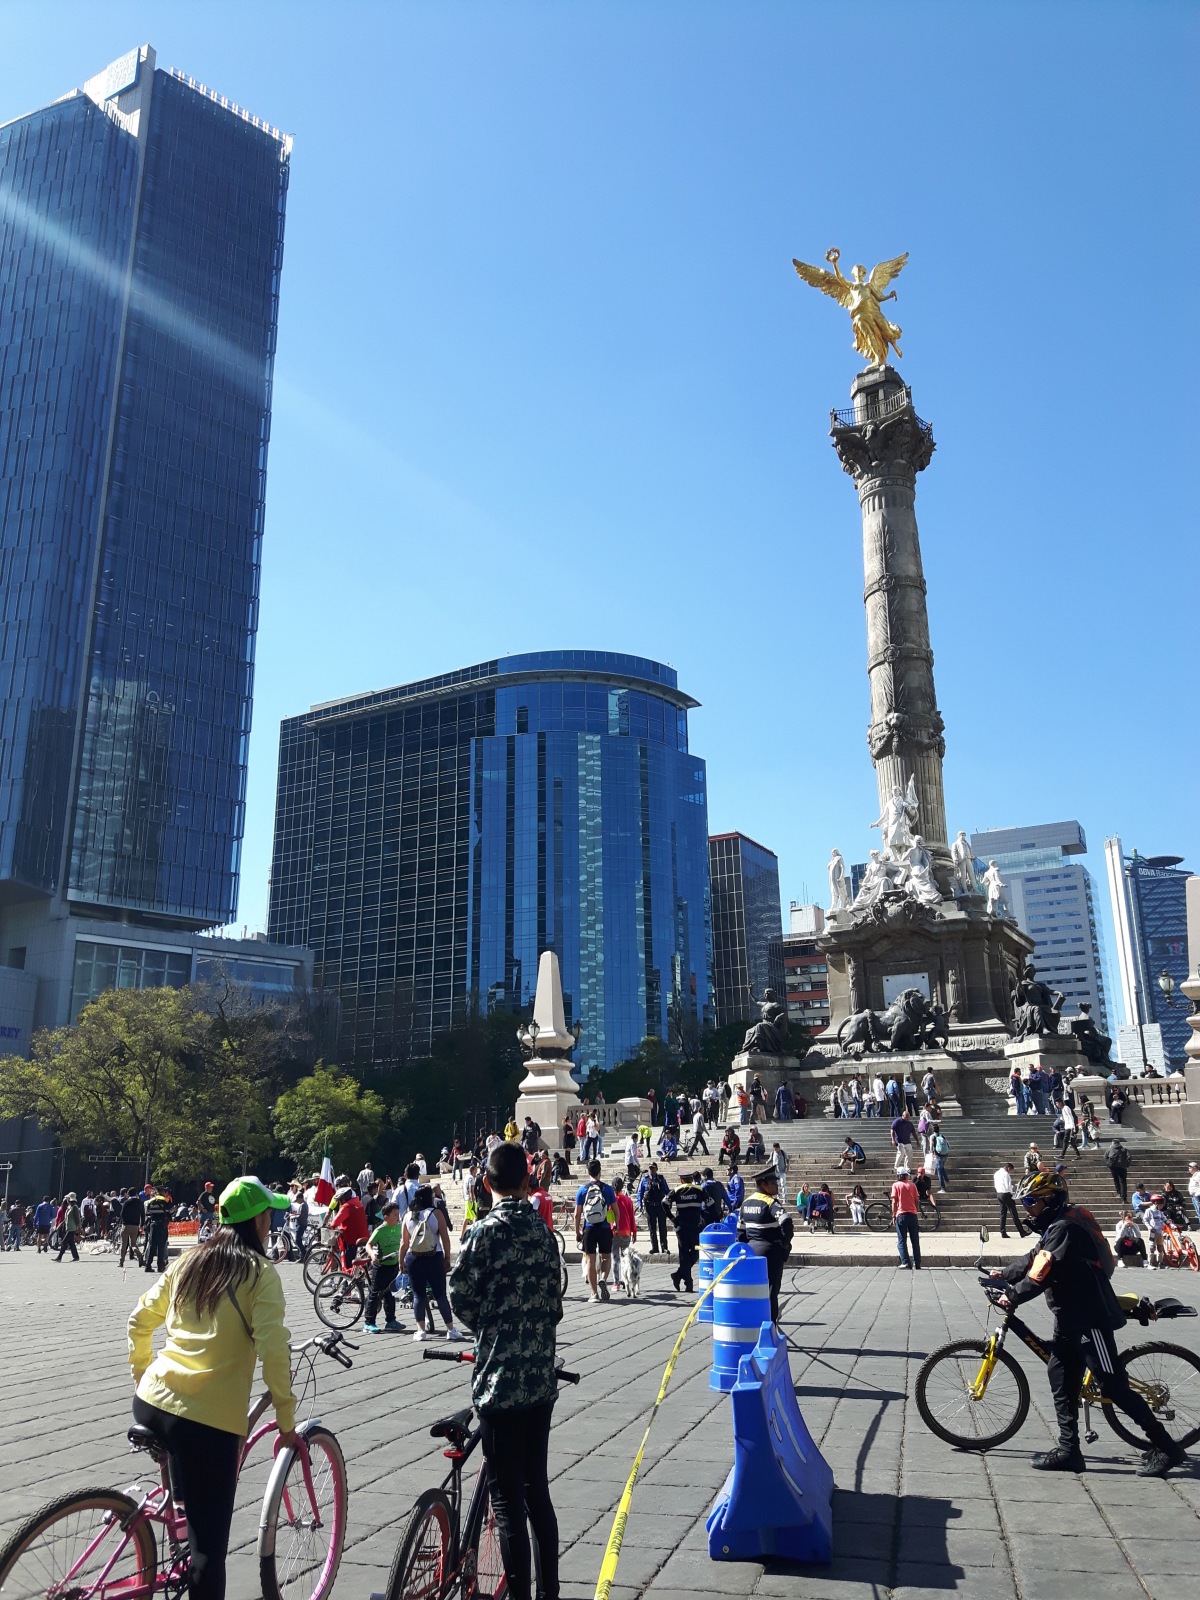 Mexico City Tips – Stay Safe and Have Fun Solo or Together